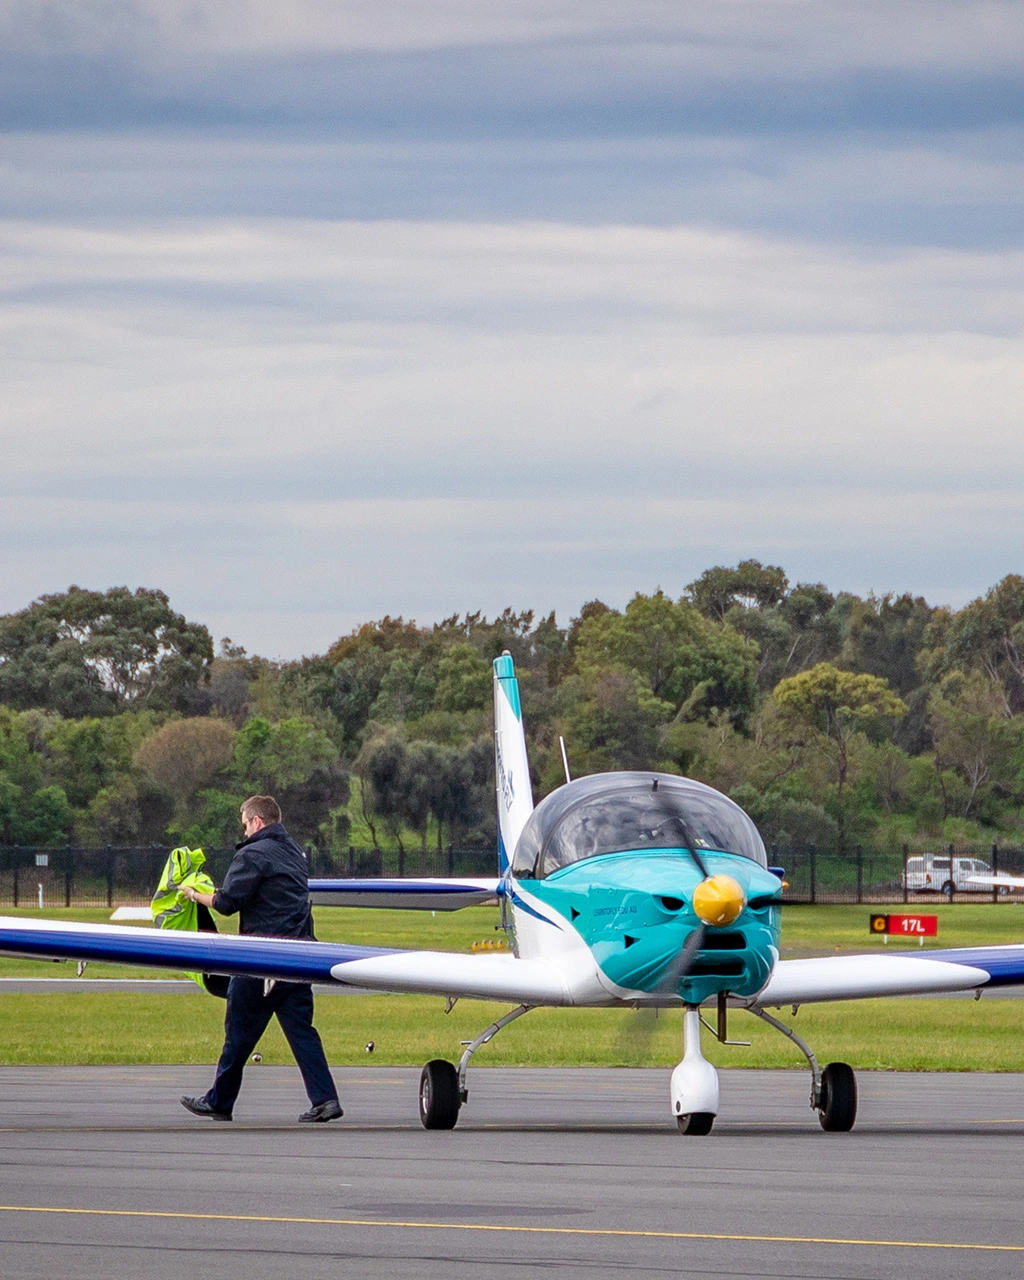 4 Important Tips to Help You Prepare For Your First Solo Flight